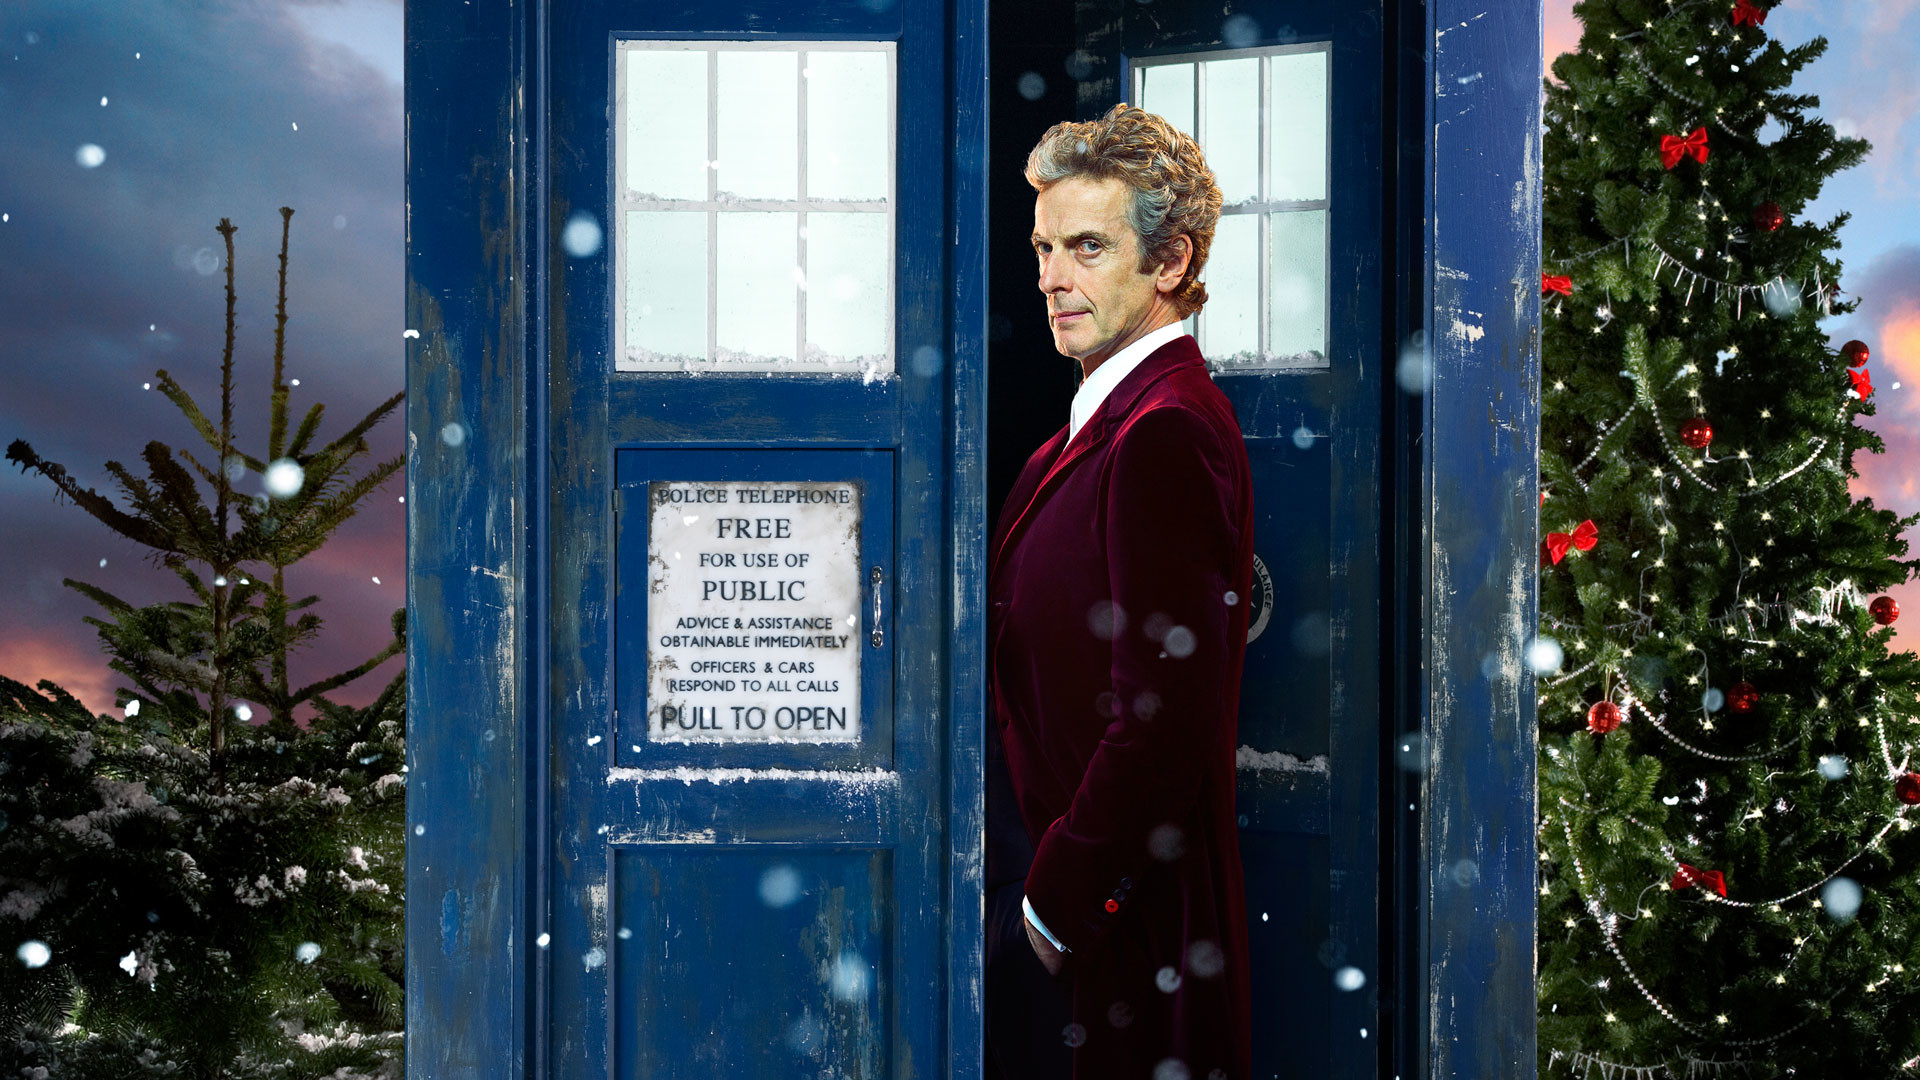 Arts / CraftsA Doctor Who Christmas Wallpaper featuring Peter Capaldi as the Doctor, nice and early for your desktop